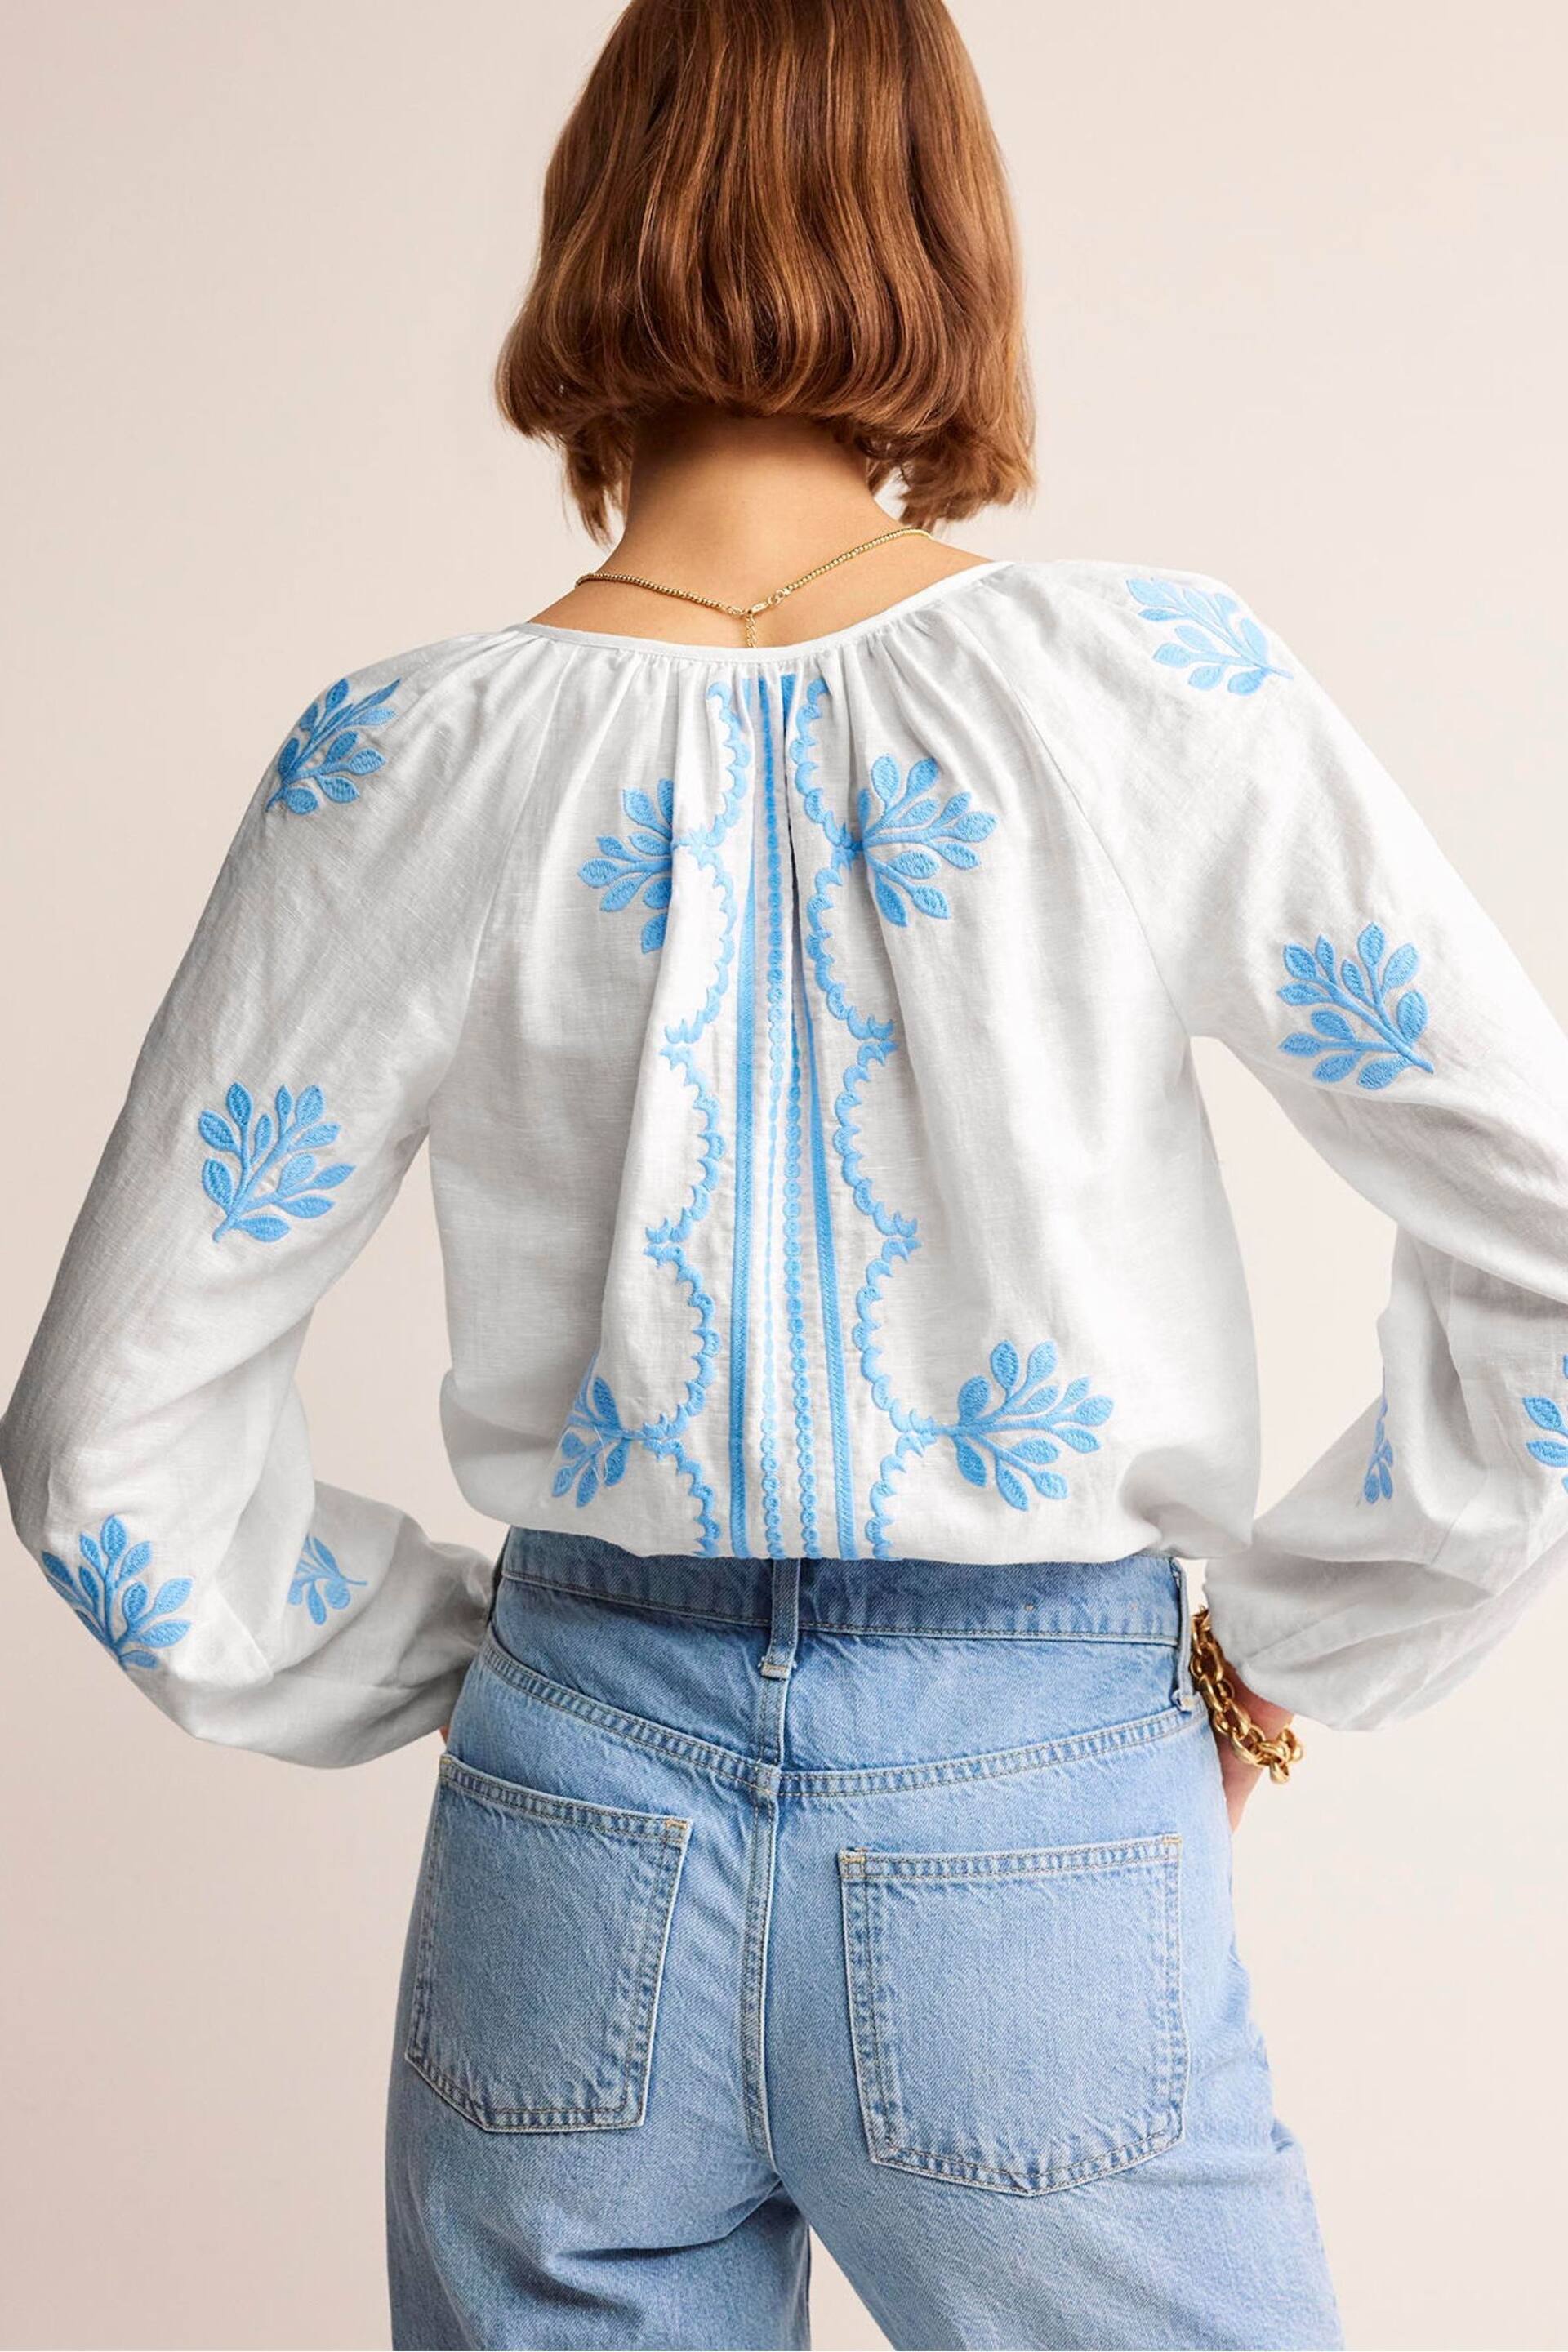 Boden White Serena Embroidered Blouse - Image 3 of 5